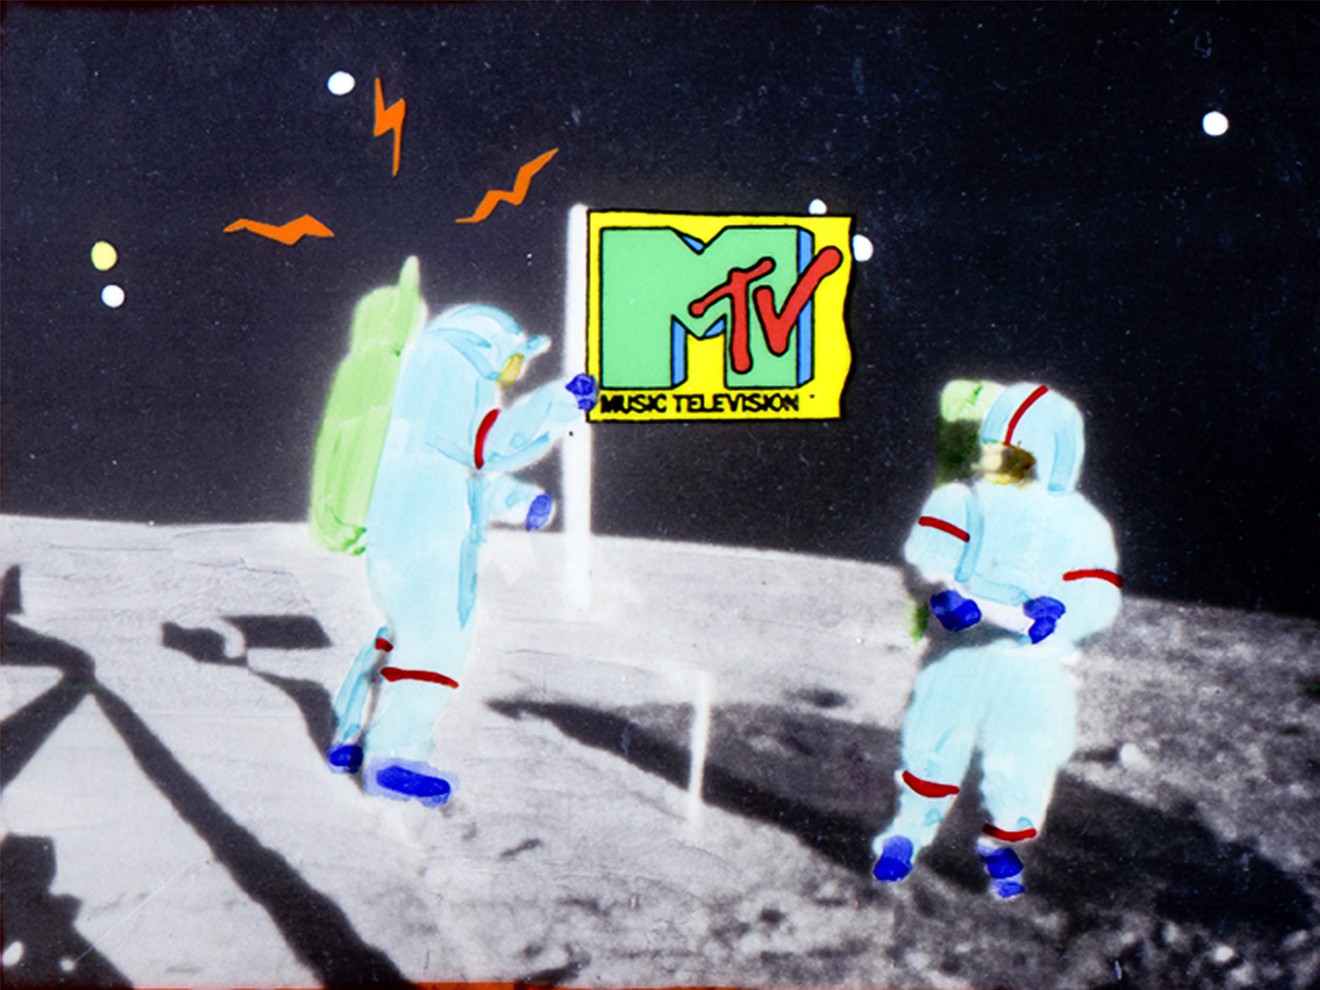 MTV's famous NASA moon footage was used in promos because it was in the public domain and was free to use. The channel debuted on August 1, 1981.